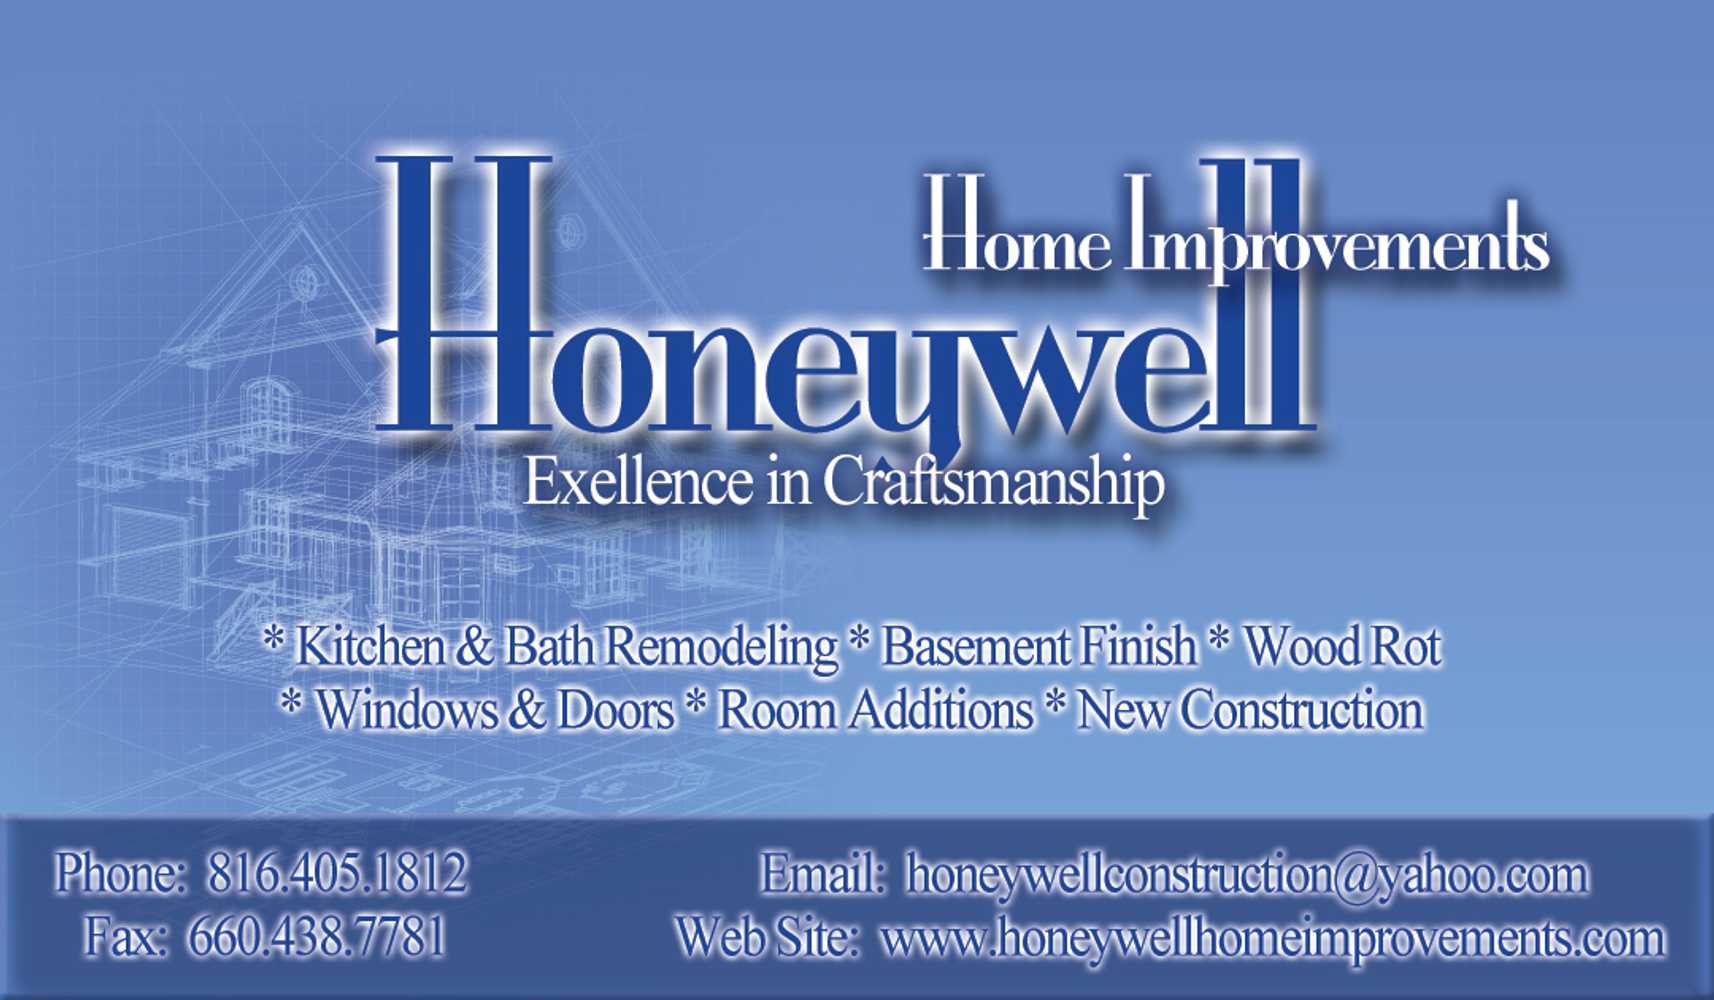 Projects by Honeywell Home Improvements